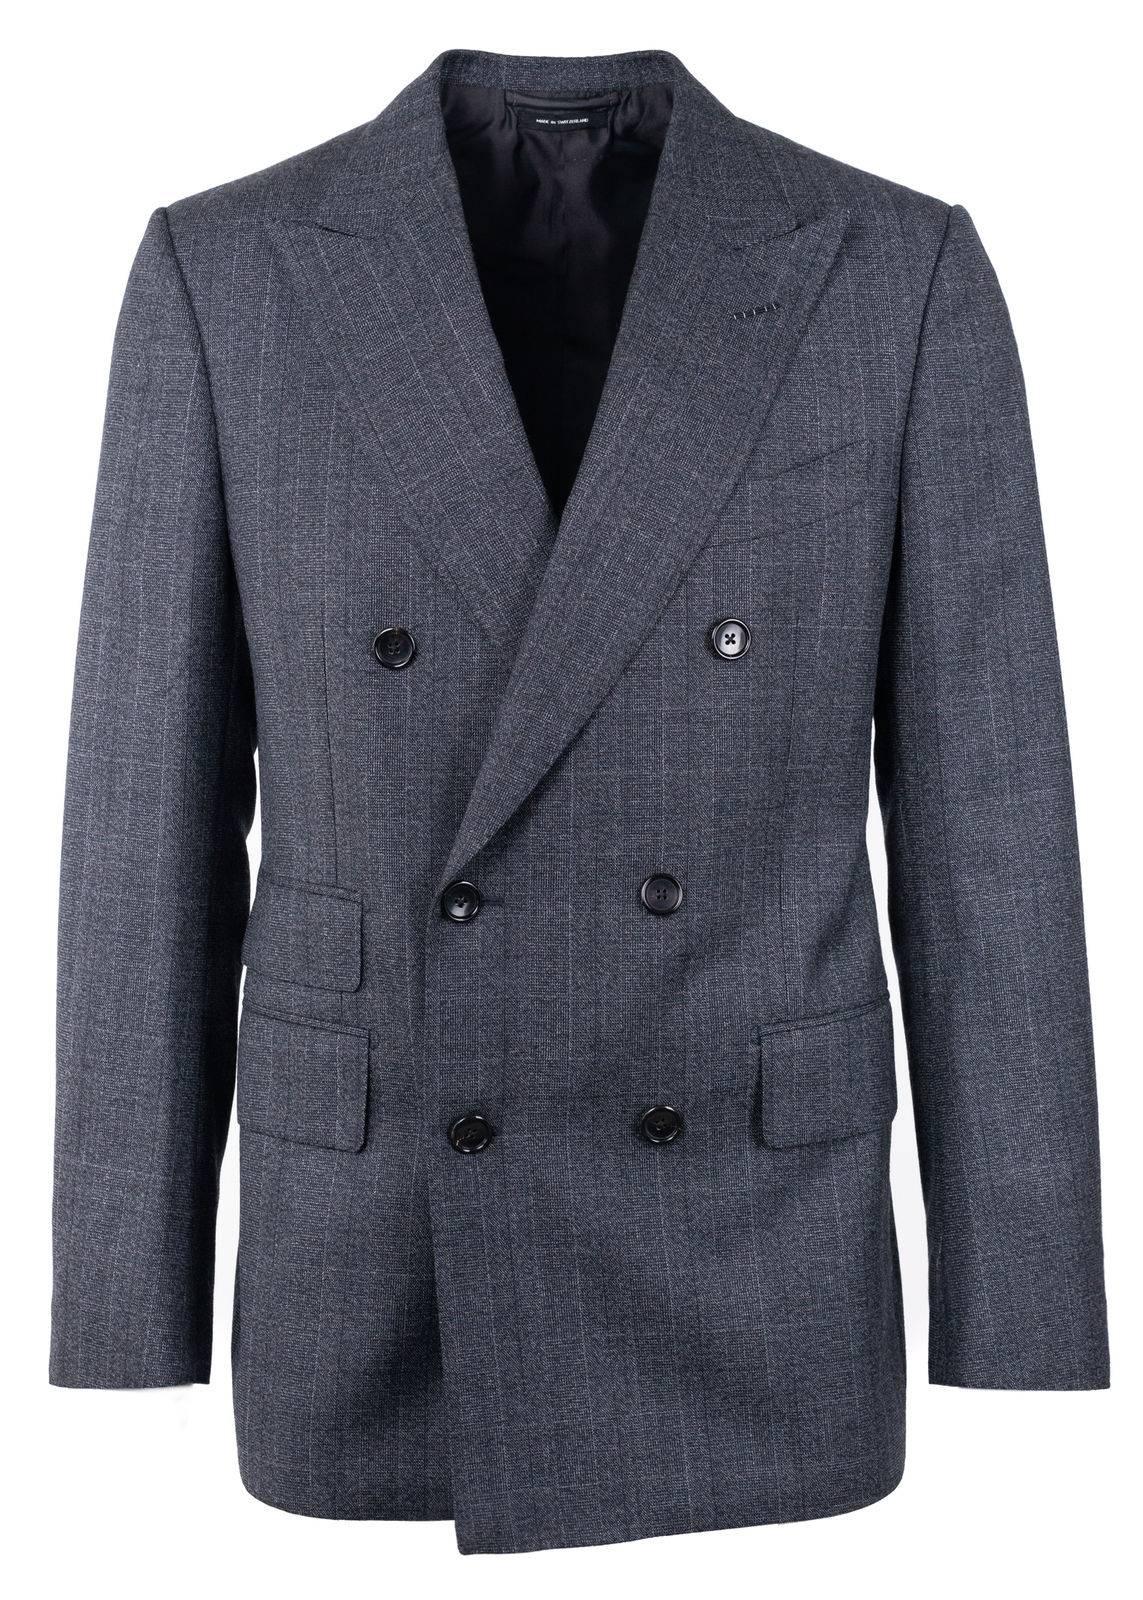 Add to your days decorum in your Tom Ford Shelton suit. This classic two piece features a irregular canvas texture, baste stitched shoulder line, and double breasted jacket. You can pair this suit with a stark white button down for nostalgic